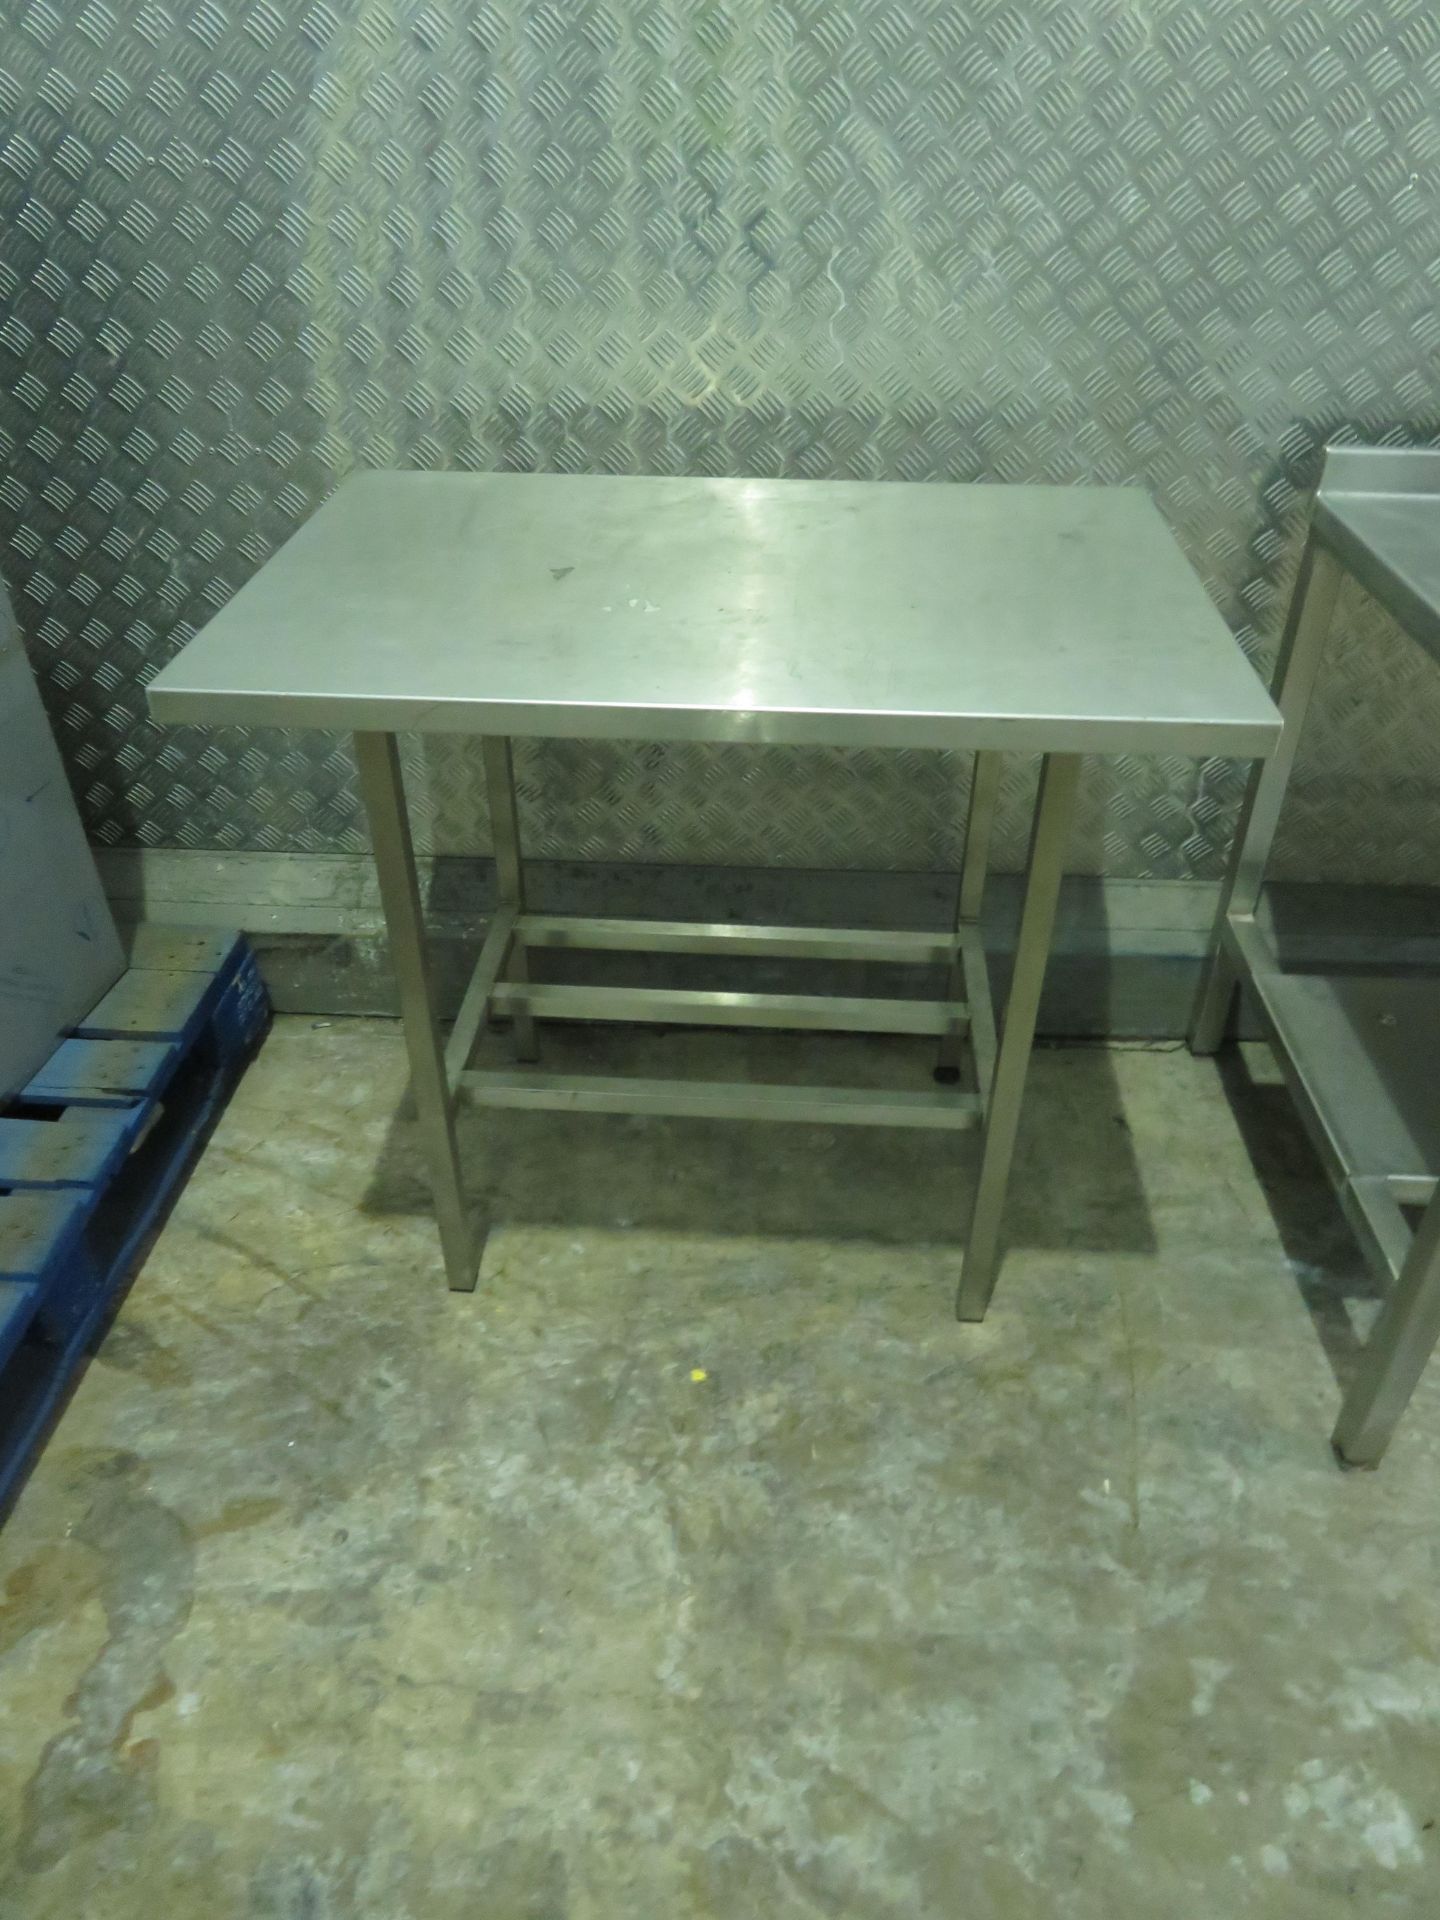 1 x SS Preparation table, 1 x SS table, 1 x SS mobile bin trolley, 1 SS Cabinet - unused in wrapping - Image 2 of 5